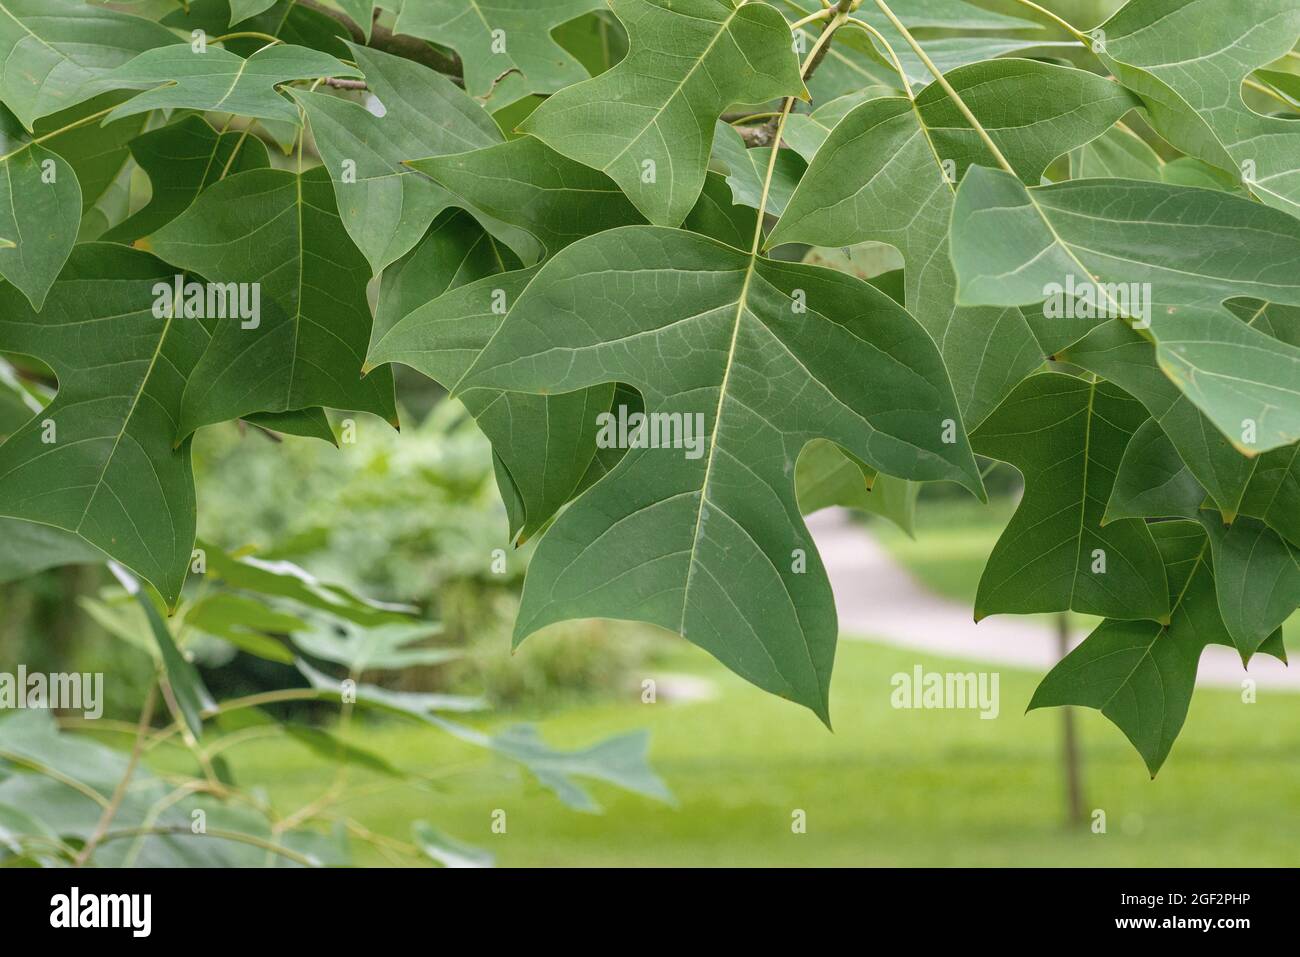 Chinese tulip poplar, Chinese tulip tree, Chinese whitewood (Liriodendron chinensis, Liriodendron chinense), leaves on a branch Stock Photo